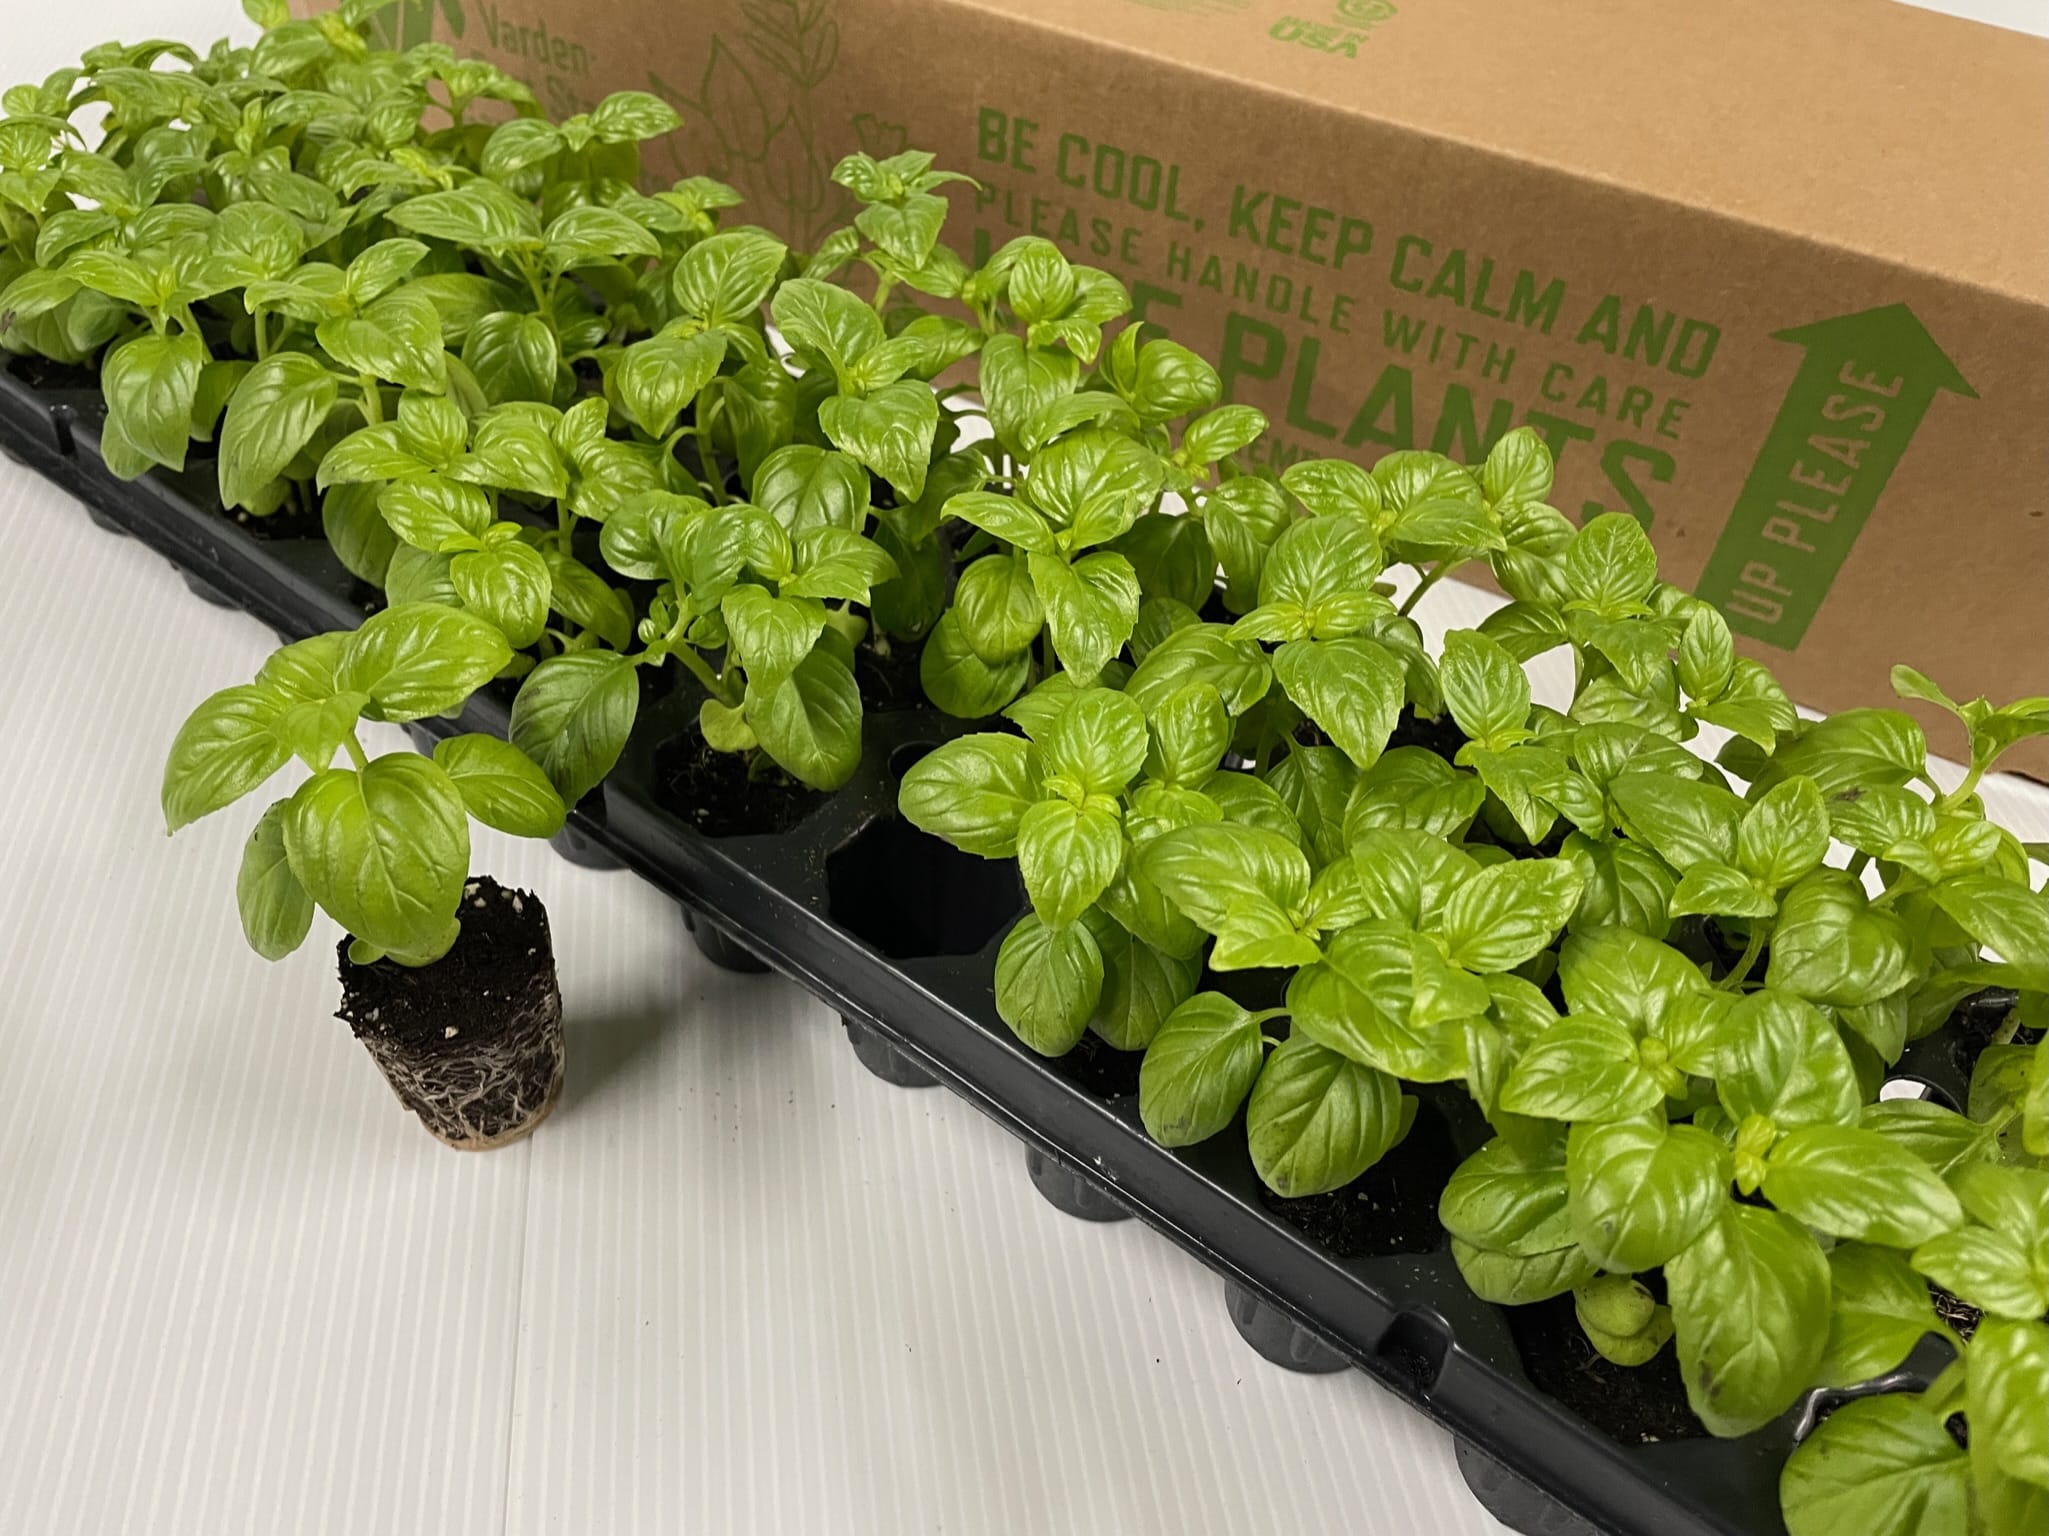 Live basil plants in tray